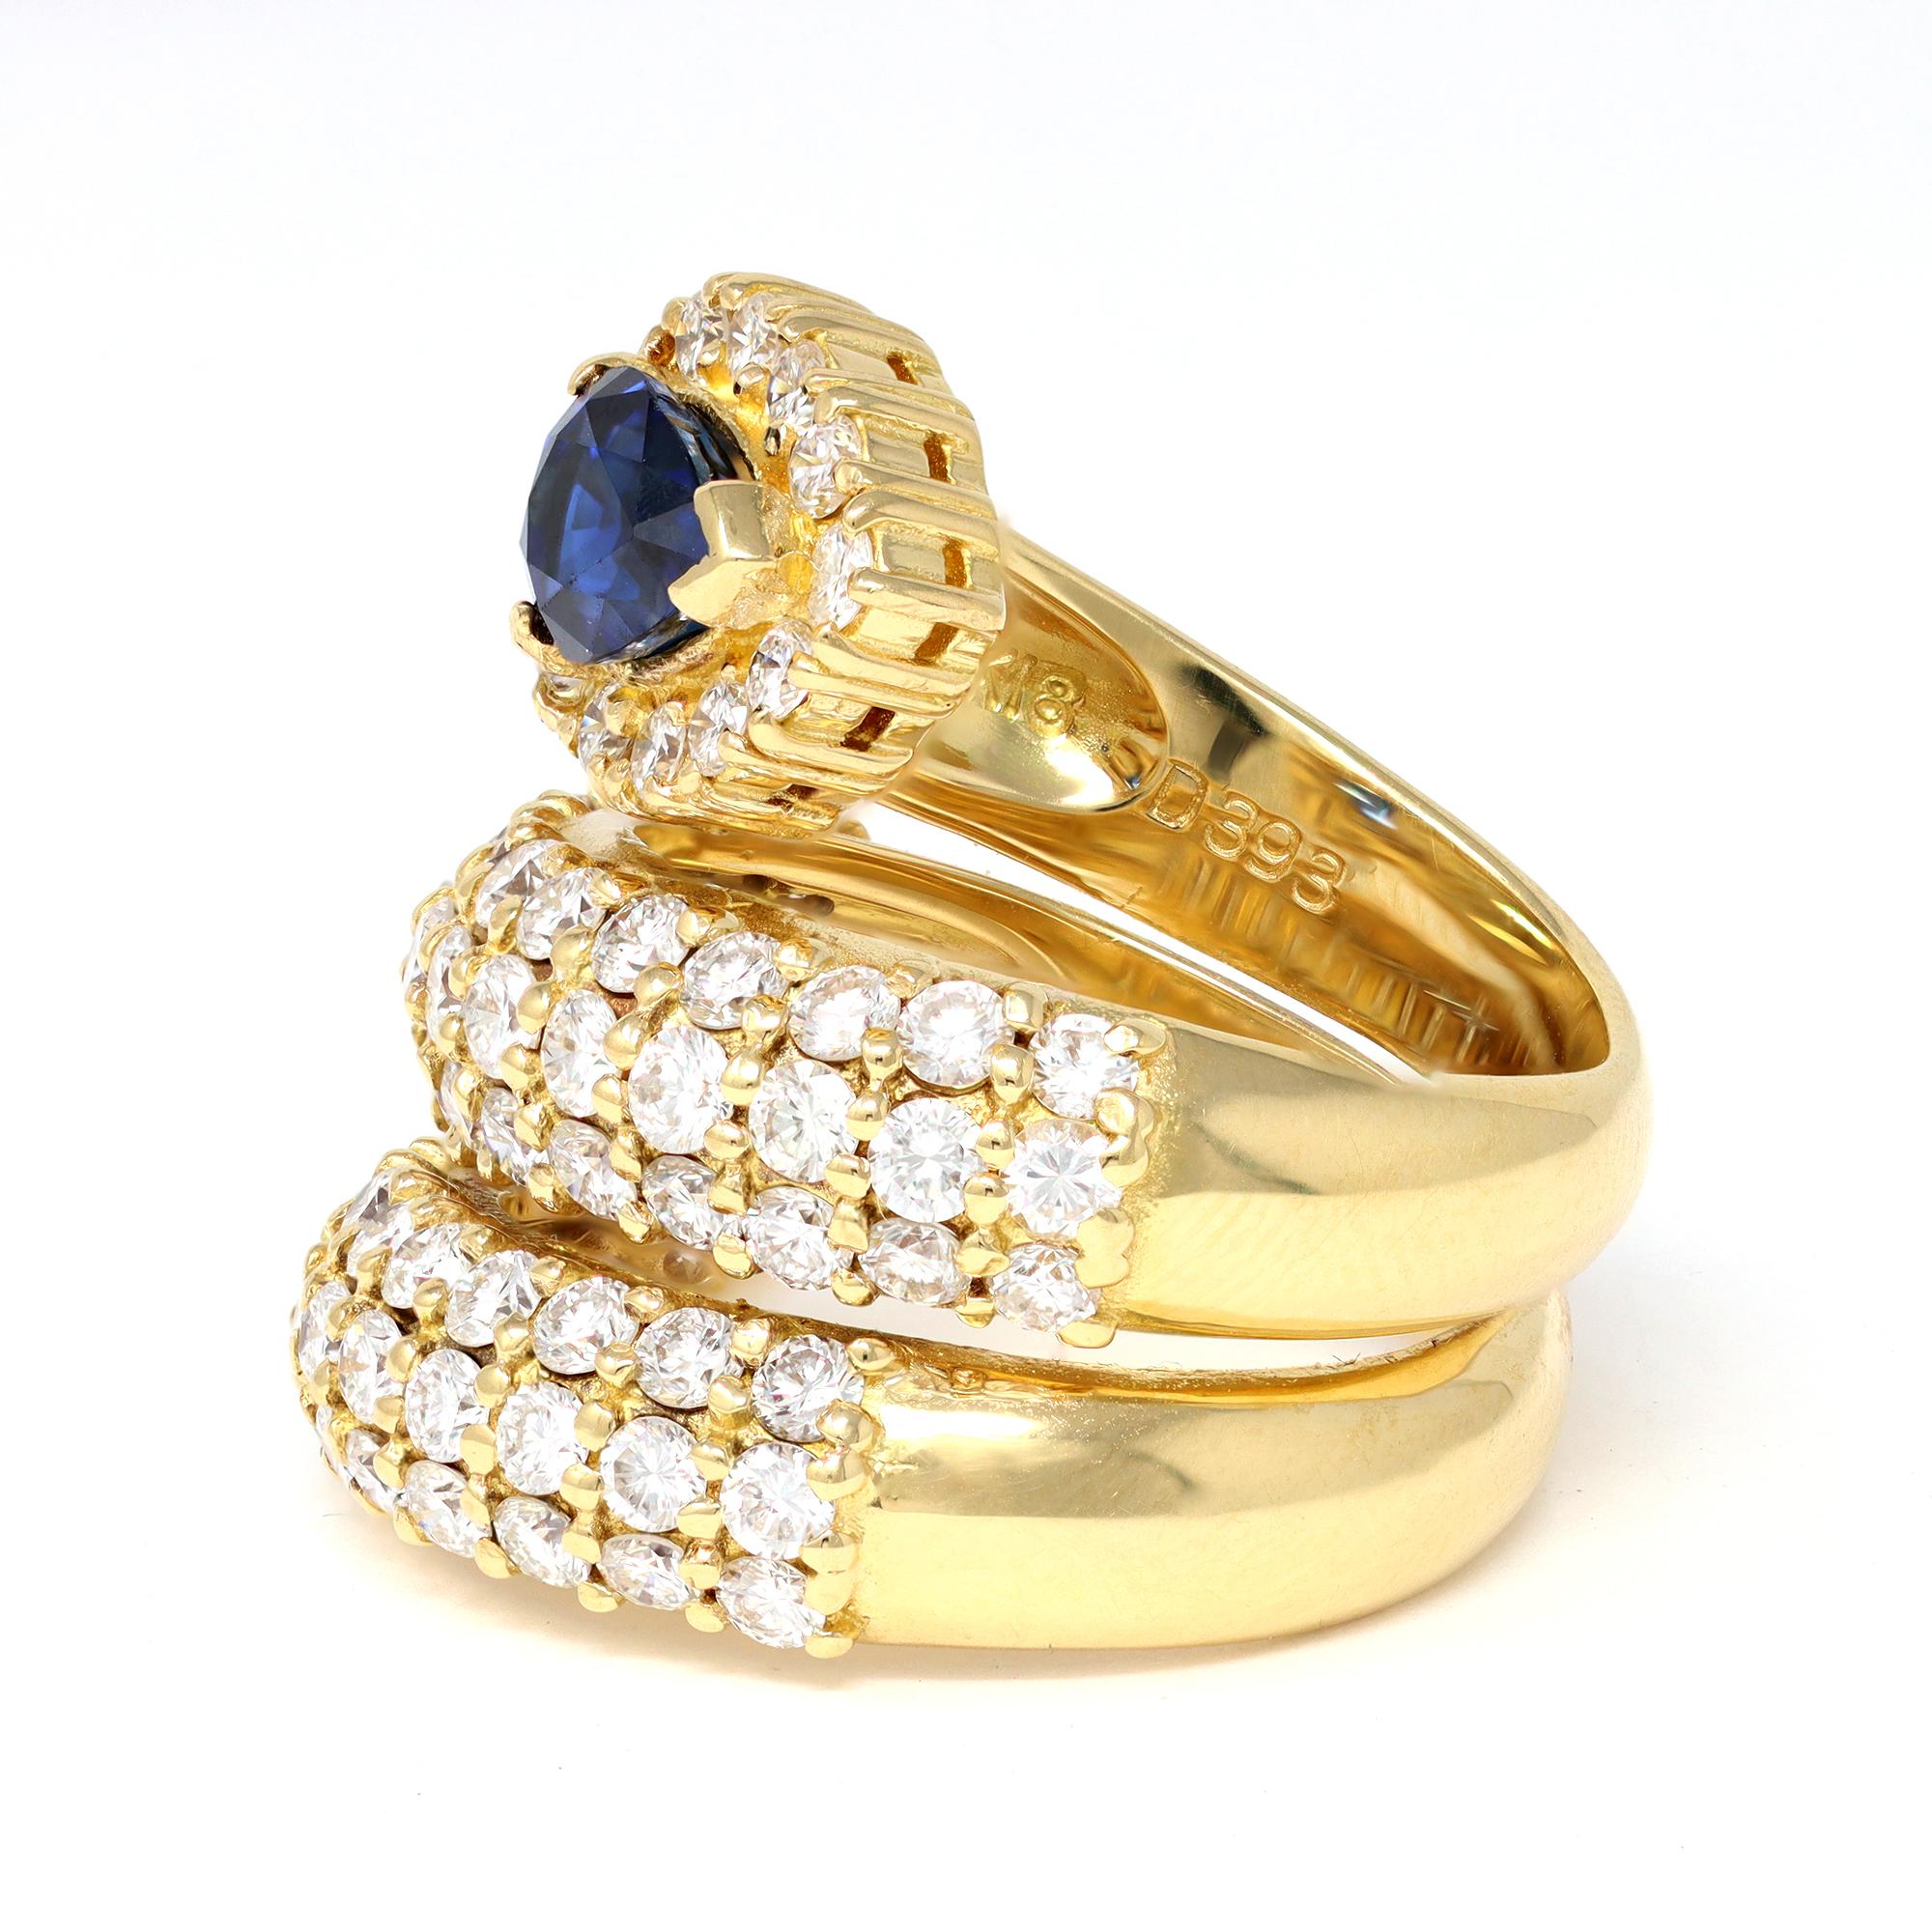 A ravishing cocktail ring designed as a snake featuring a vivid blue sapphire and pavé set diamonds. The sapphire is 1.48 carats and the diamonds are 3.93 carats. Both weights are stamped onto the ring as S-1.48 and D-3.93. The diamonds are GH color